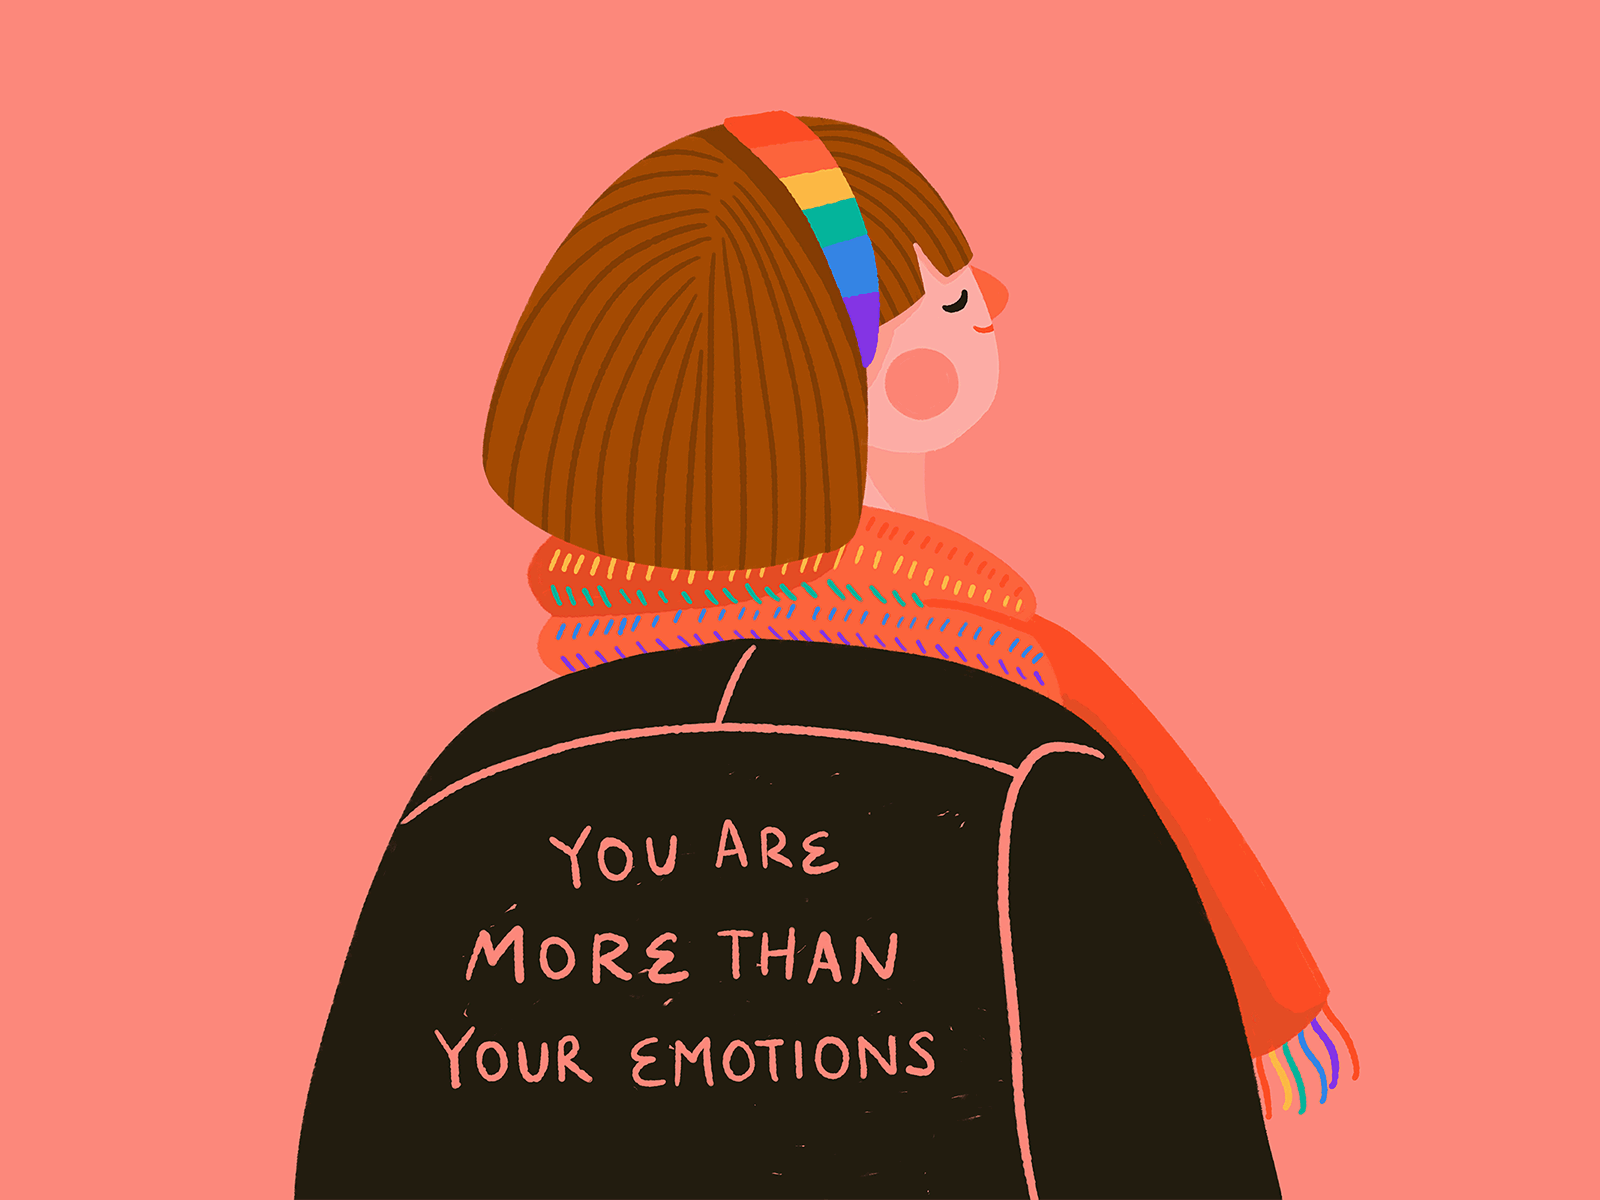 You are more than your emotions